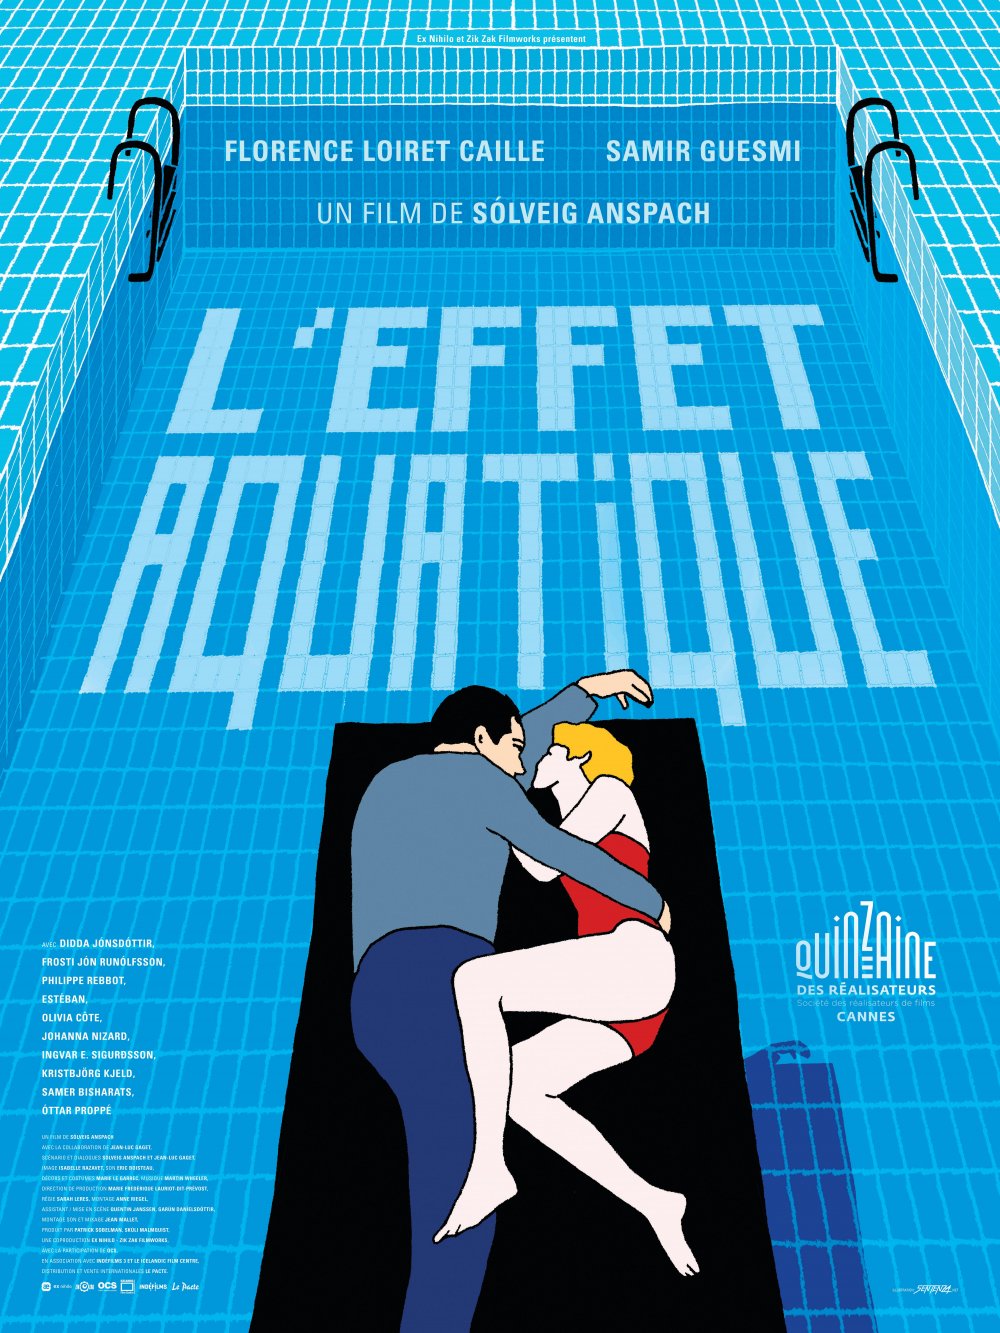 The festival poster for Solveig Anspach’s The Aquatic Effect (2016)